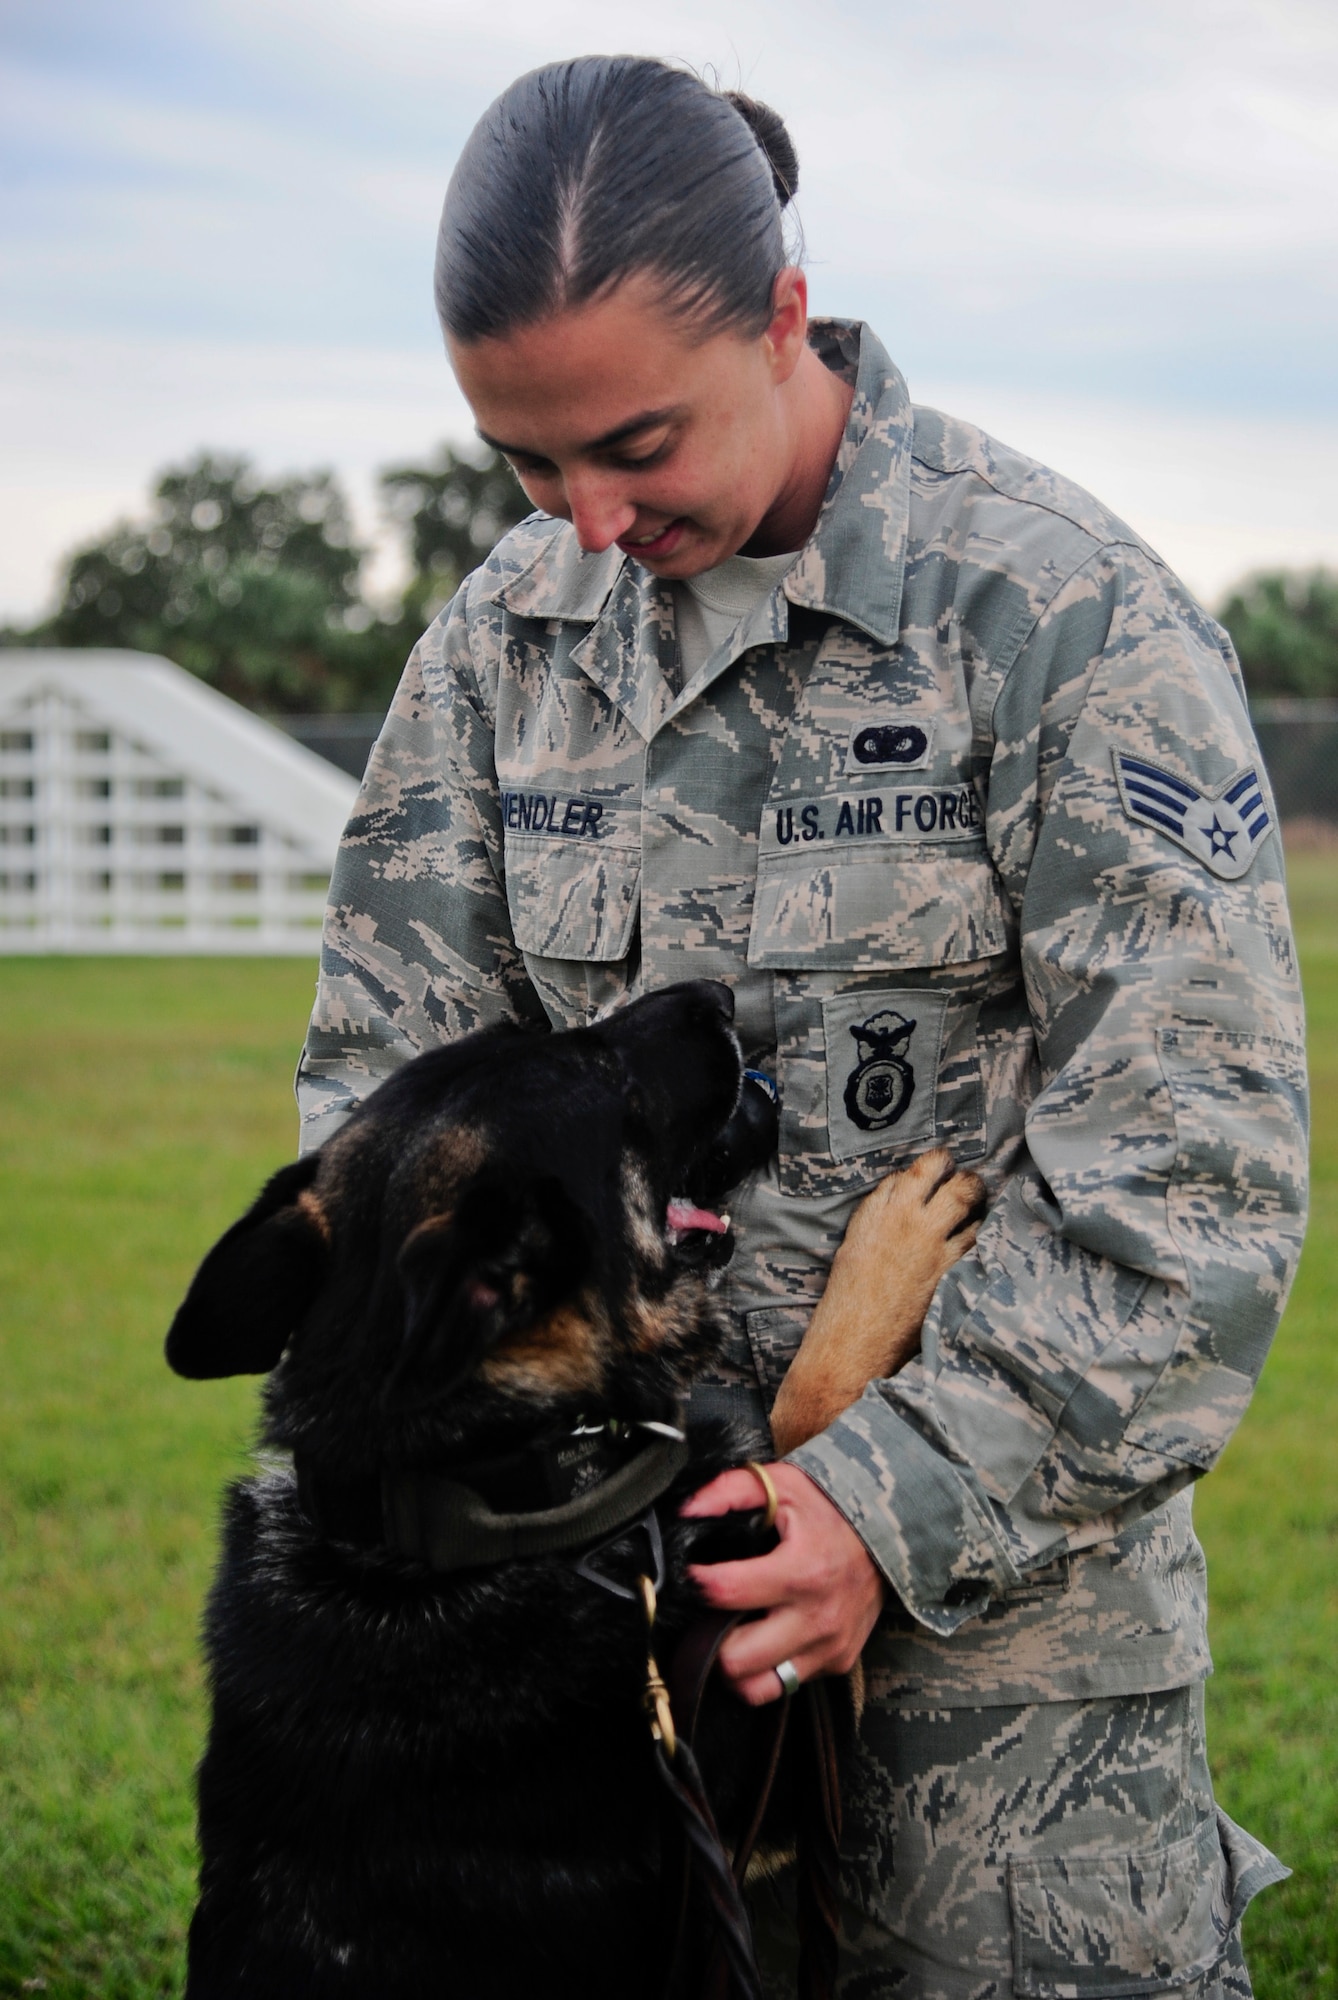 Senior Airman Ashley Wendler, 6th Security Forces Squadron military working dog handler, holds her partner, MWD Alex, as he gives her a dog toy at MacDill Air Force Base, Fla., Nov. 18, 2014. The two spend numerous hours together to train and build rapport in order to become a successful dog team. (U.S. Air Force photo by Airman 1st Class Danielle Conde/Released)